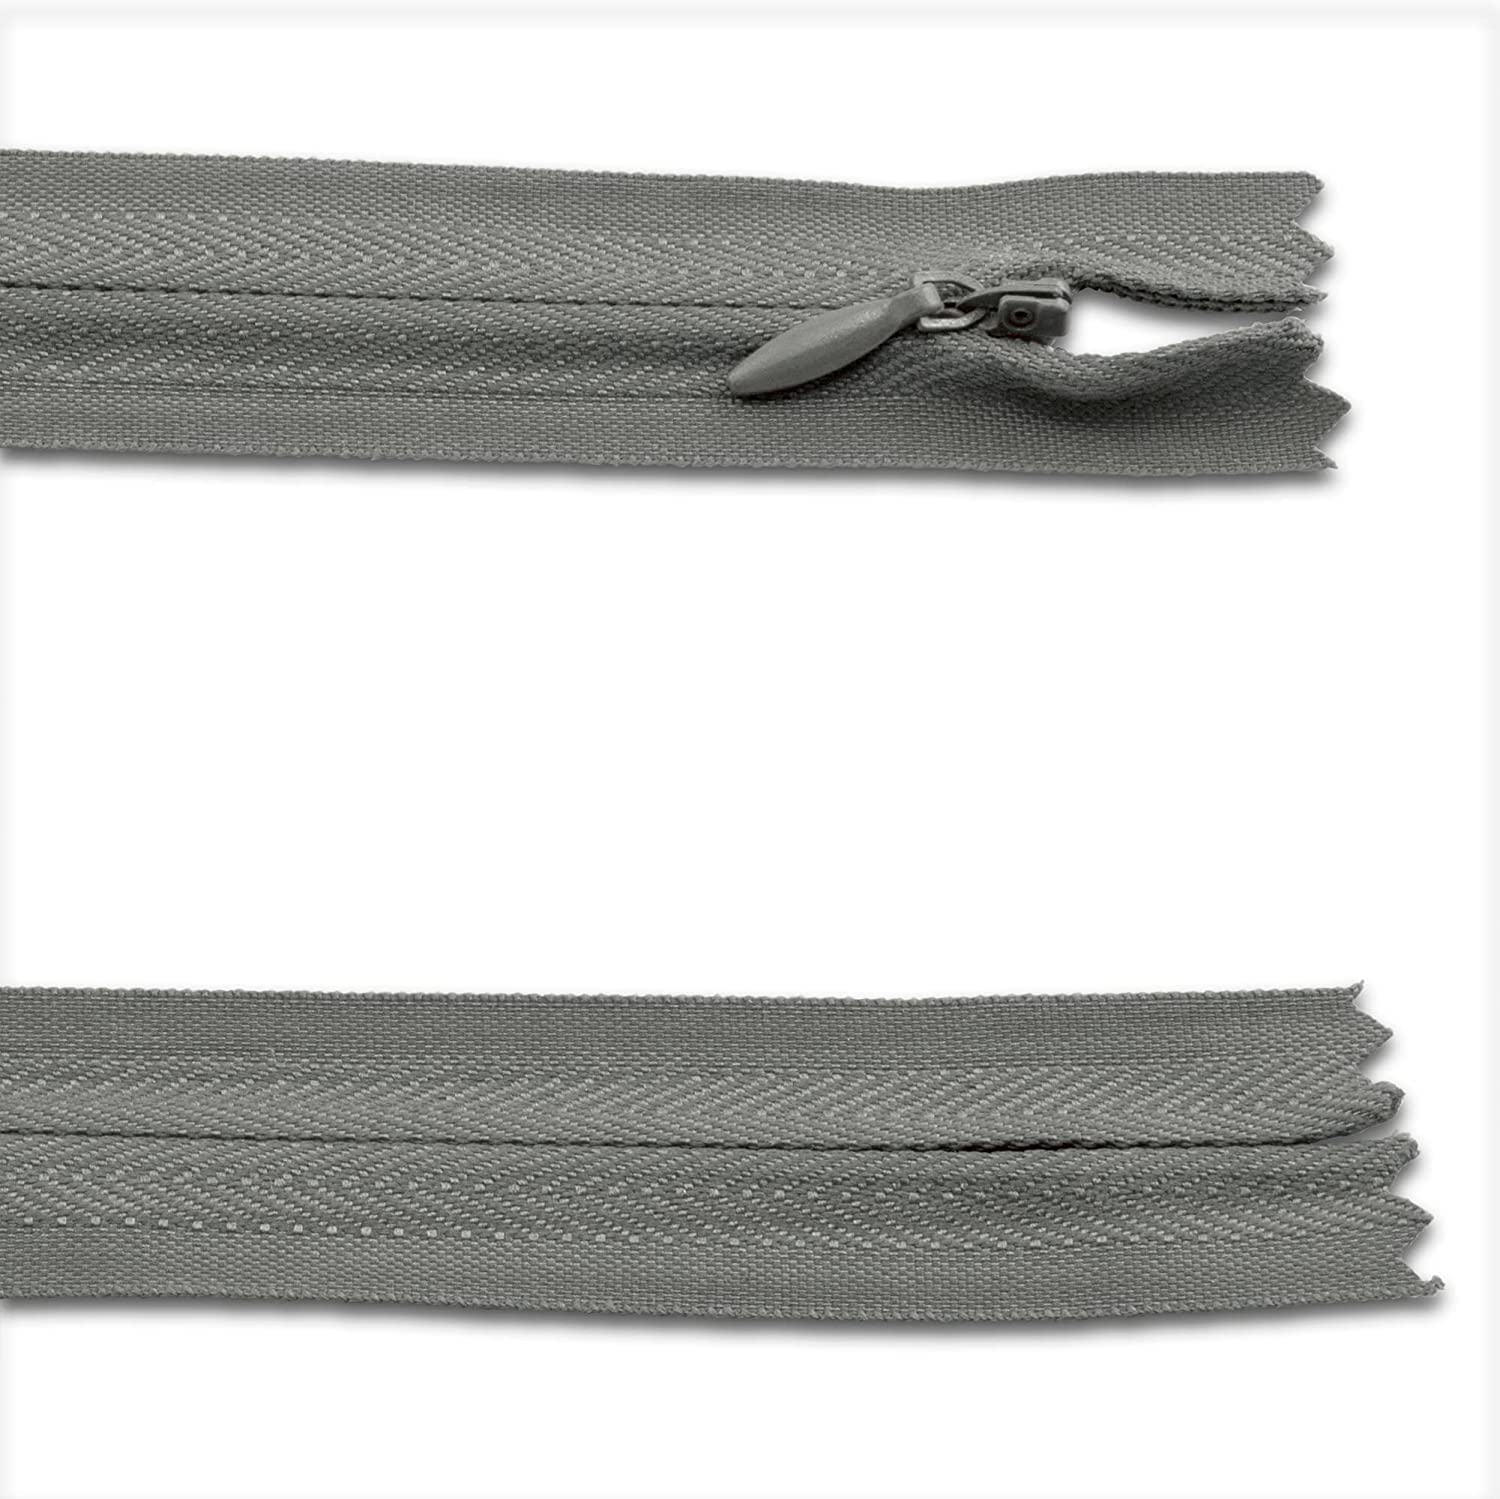 3 X Invisible Zips   Grey, 22 Inch / 55cm   Closed-Ended Concealed Zipper for Sewing by UMTMedia®